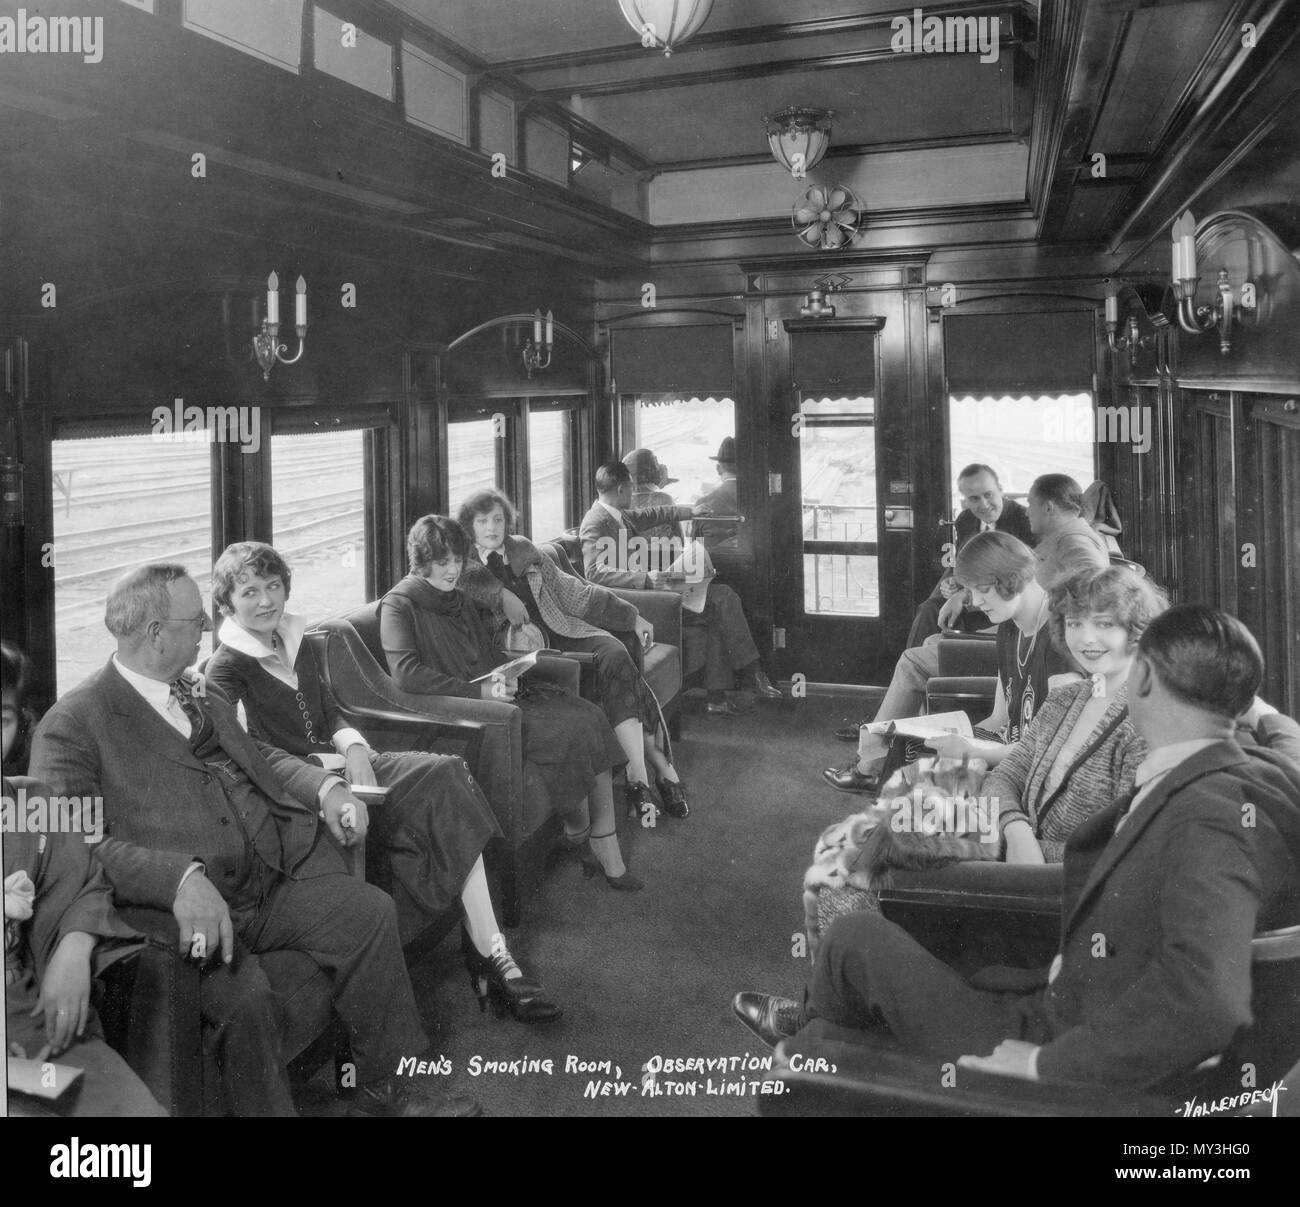 Passengers enjoy the ride in comfort in the Men's Smoking Room Observation Car onboard the C&A (Chicago & Alton Railways) flagship service between Chicago and St Louis, 1925. Stock Photo